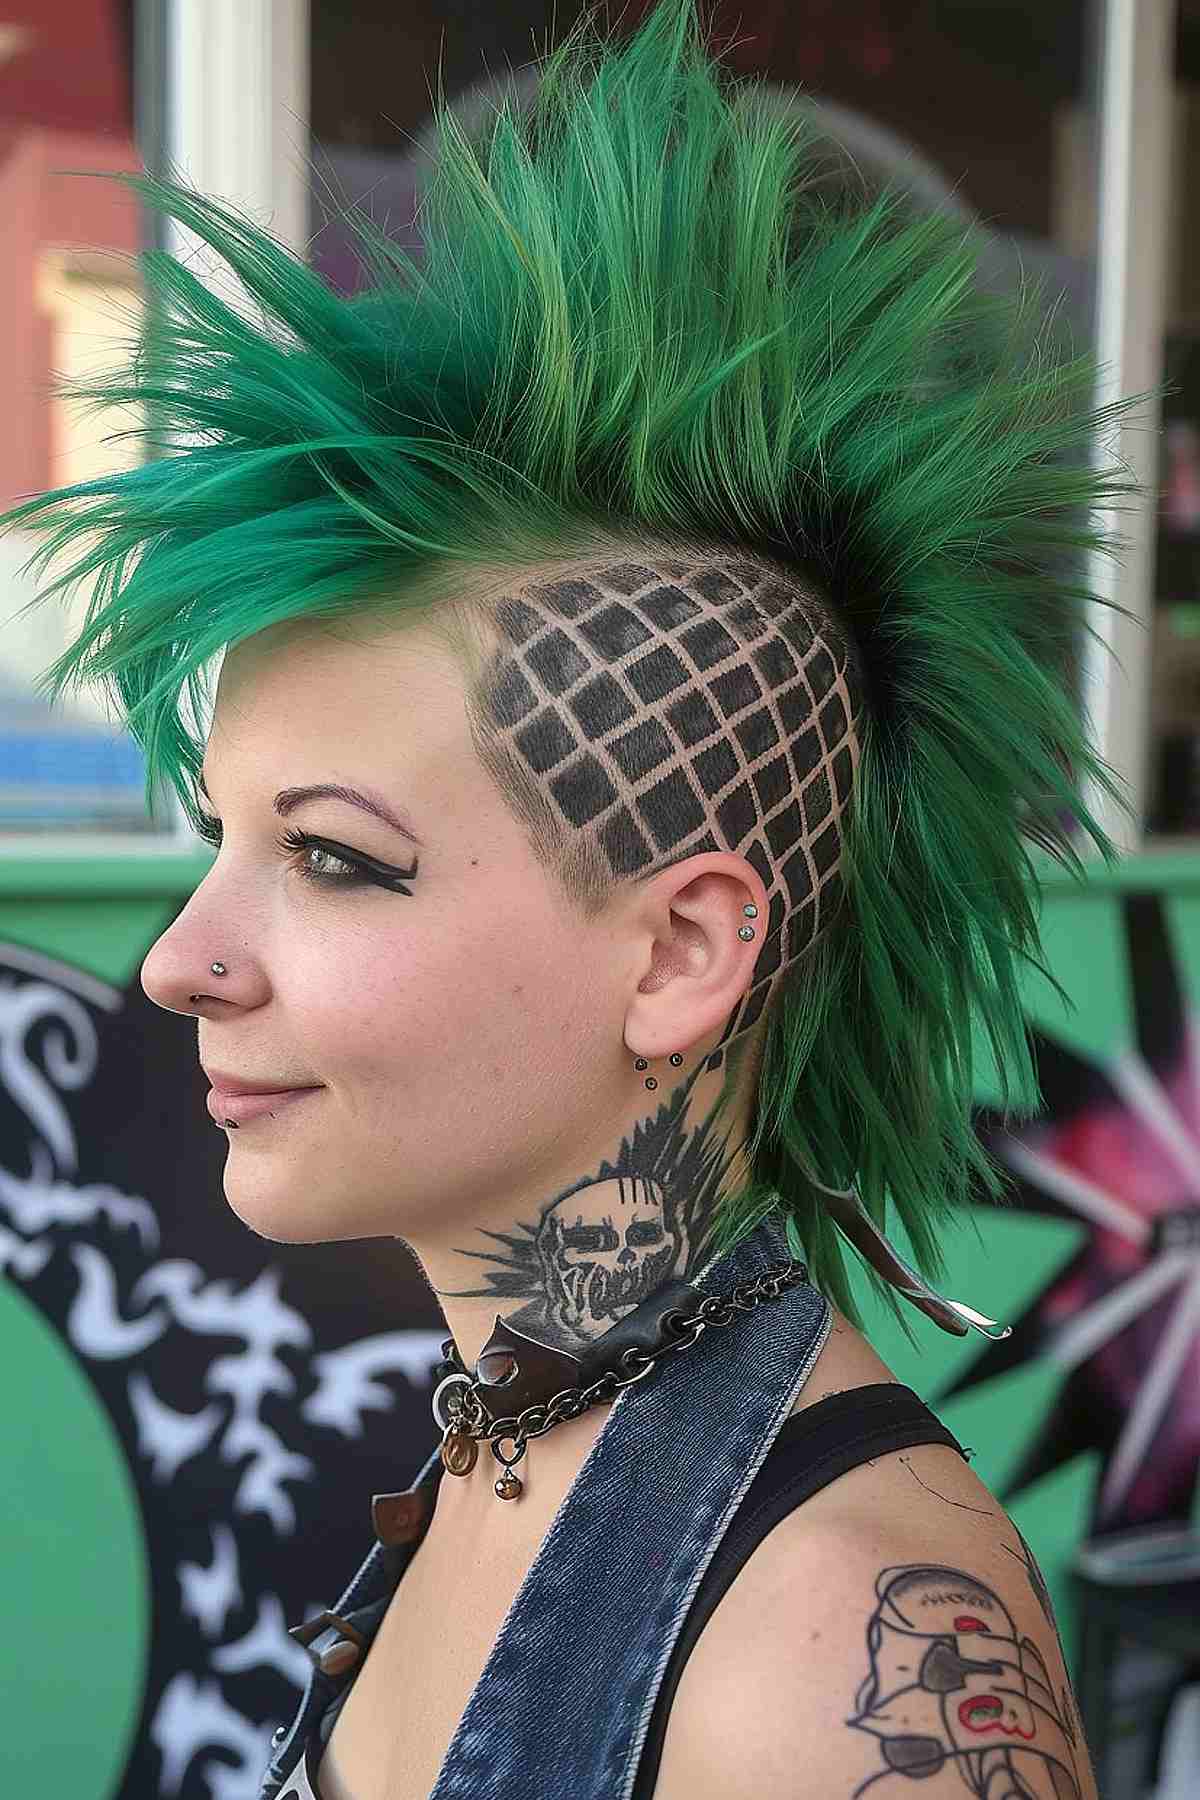 Deathhawk hairstyle with green mohawk and intricate shaved side patterns for women